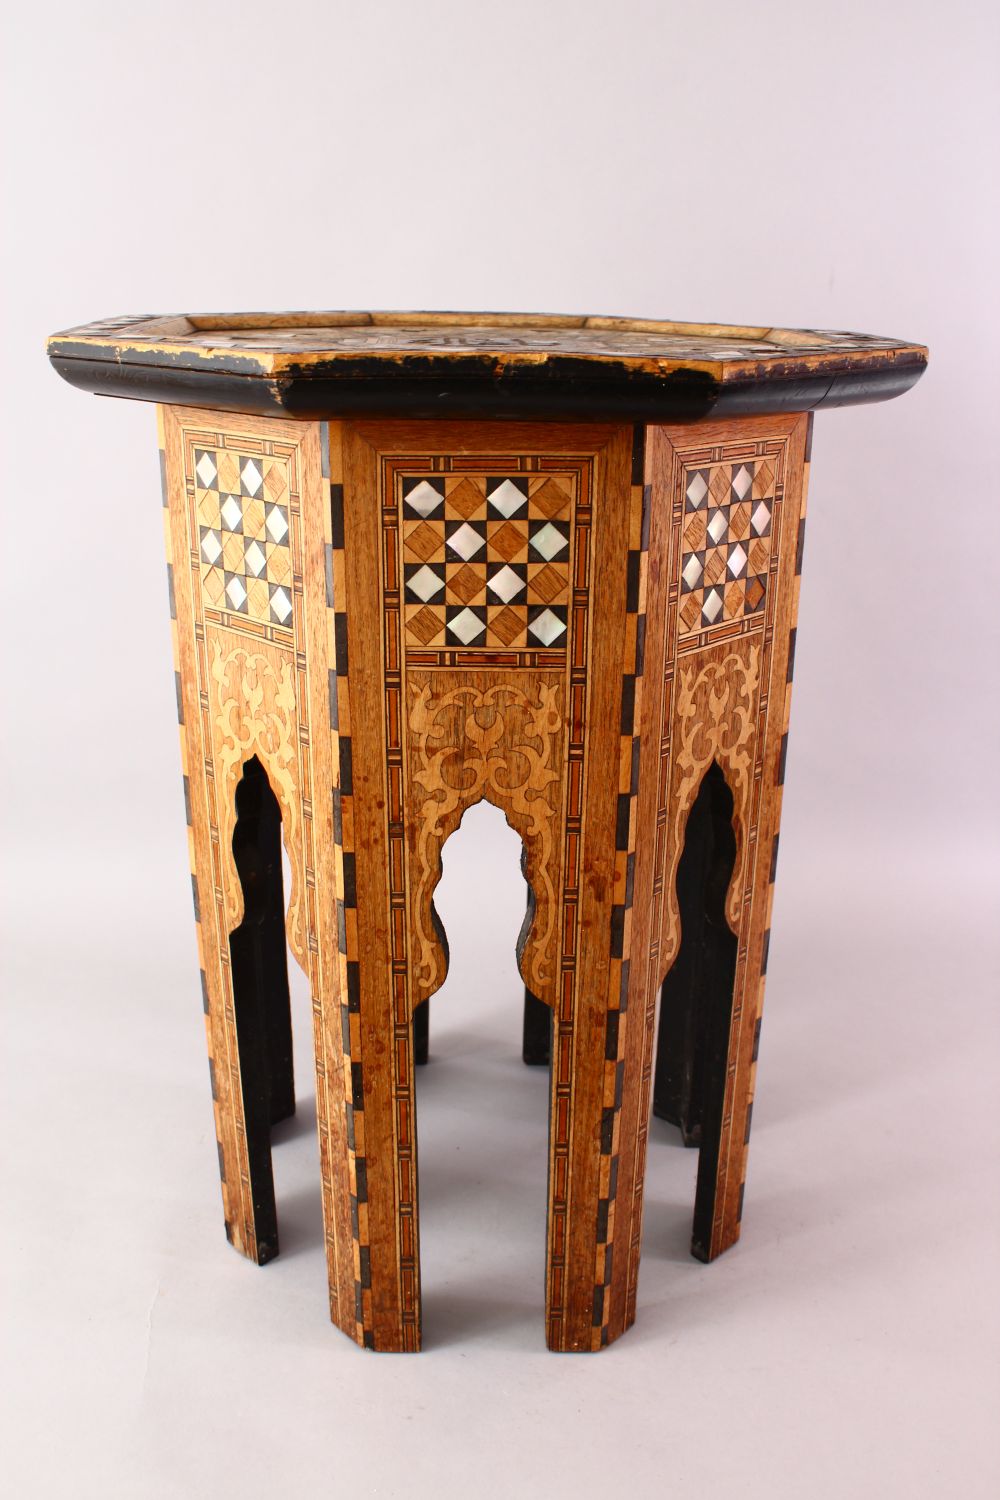 A FINE 19TH CENTURY TURKISH OTTOMAN MOTHER OF PEARL INLAID OCTAGONAL WOODEN TABLE, The top with - Image 5 of 6